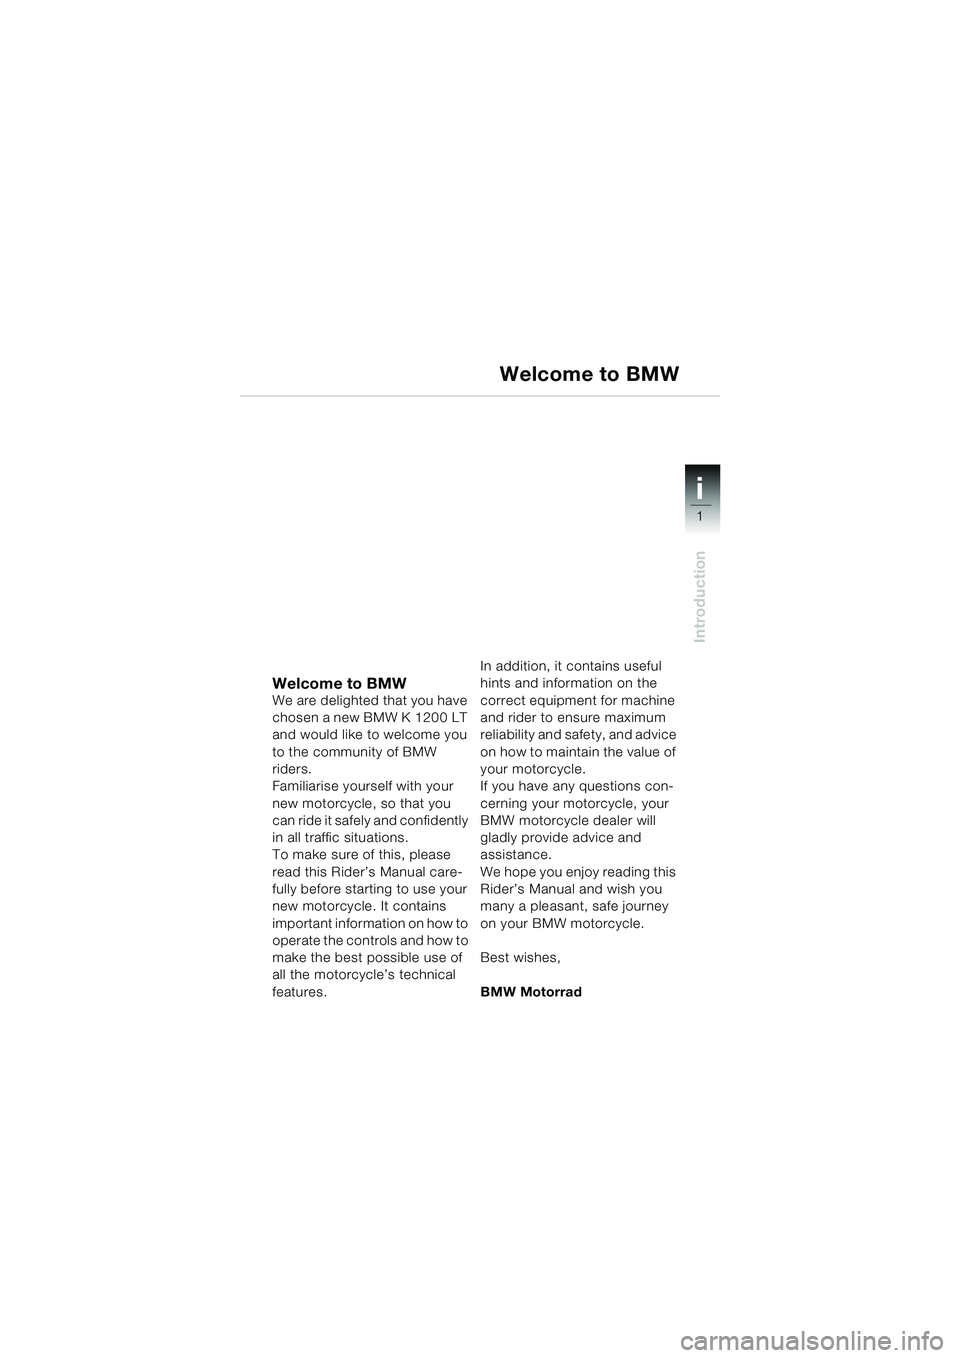 BMW MOTORRAD K 1200 LT 2002  Riders Manual (in English) 1
Introduction
i
Welcome to BMWWe are delighted that you have 
chosen a new BMW K 1200 LT 
and would like to welcome you 
to the community of BMW 
riders.
Familiarise yourself with your 
new motorcycl